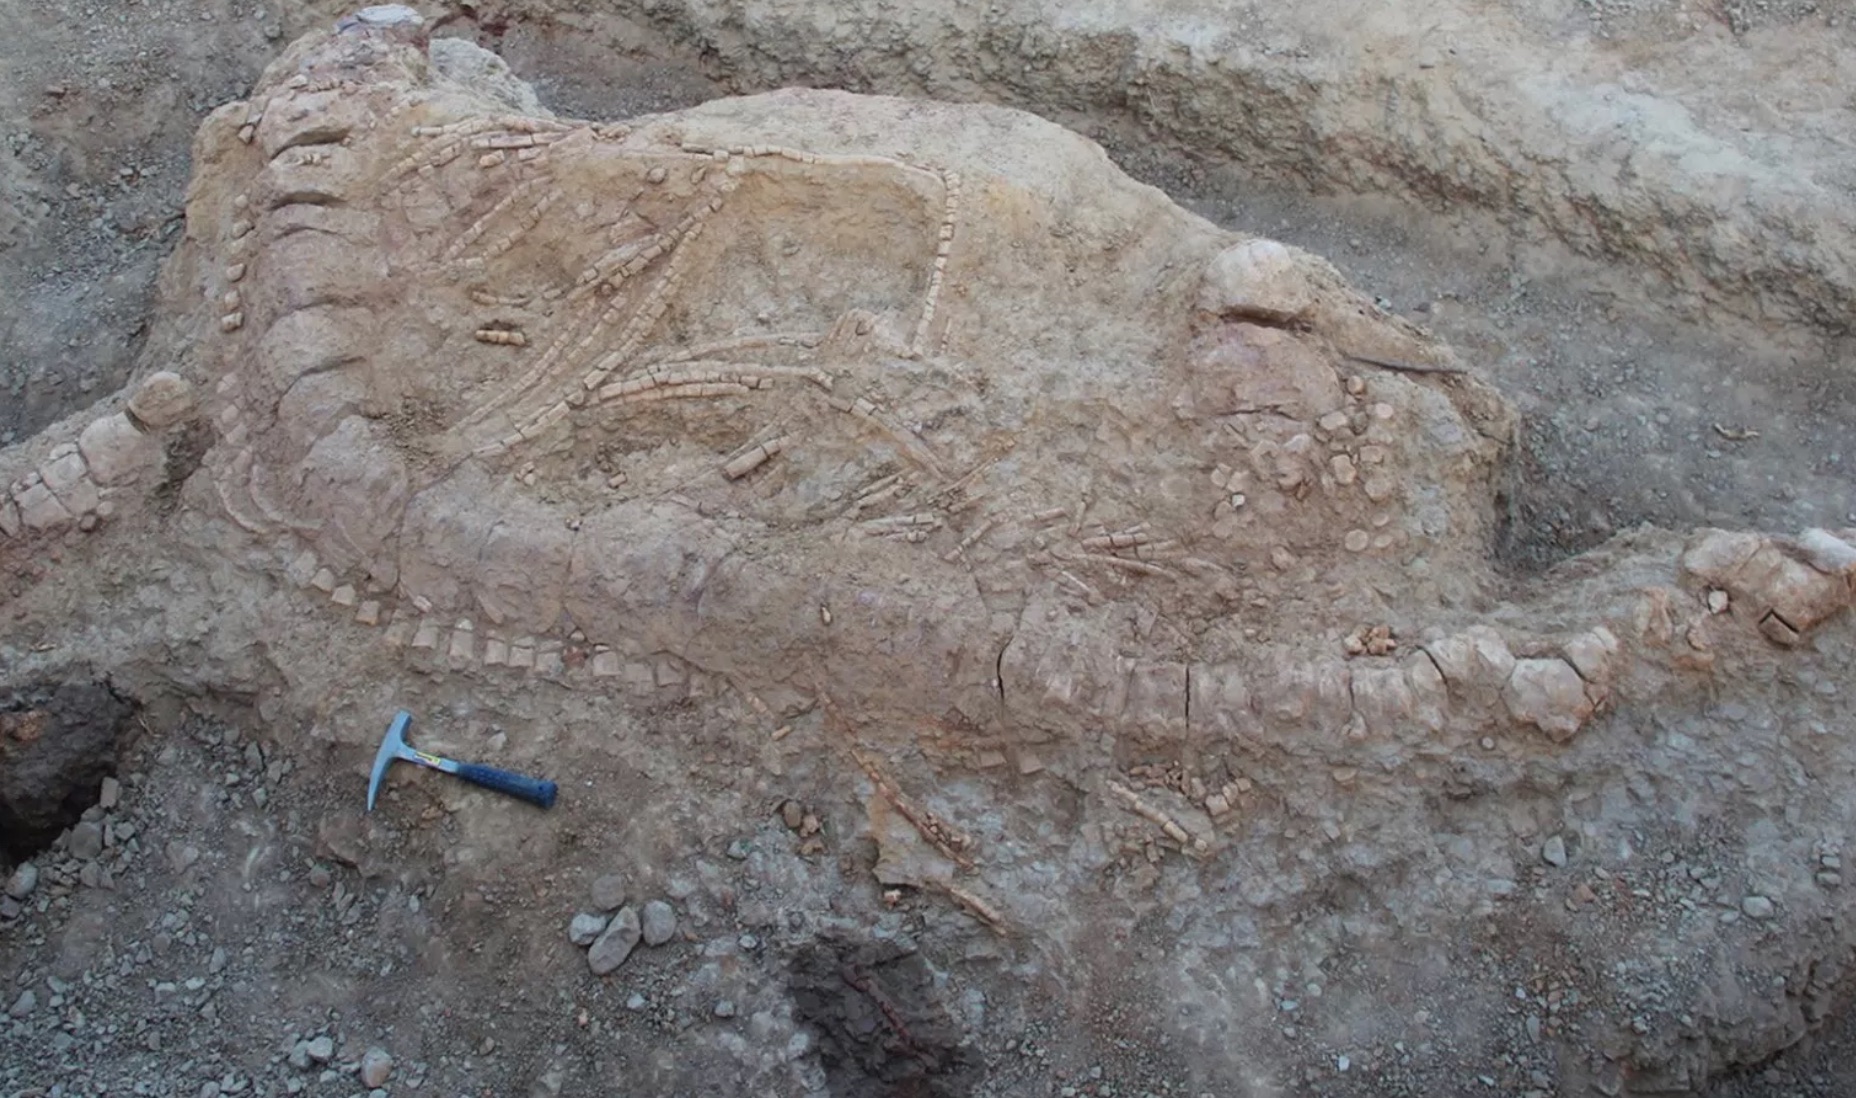 A field photograph of the excavated ichthyosaur skeleton in the Katrol Formation near Lodai village, Gujarat. Caption and source: PLOS